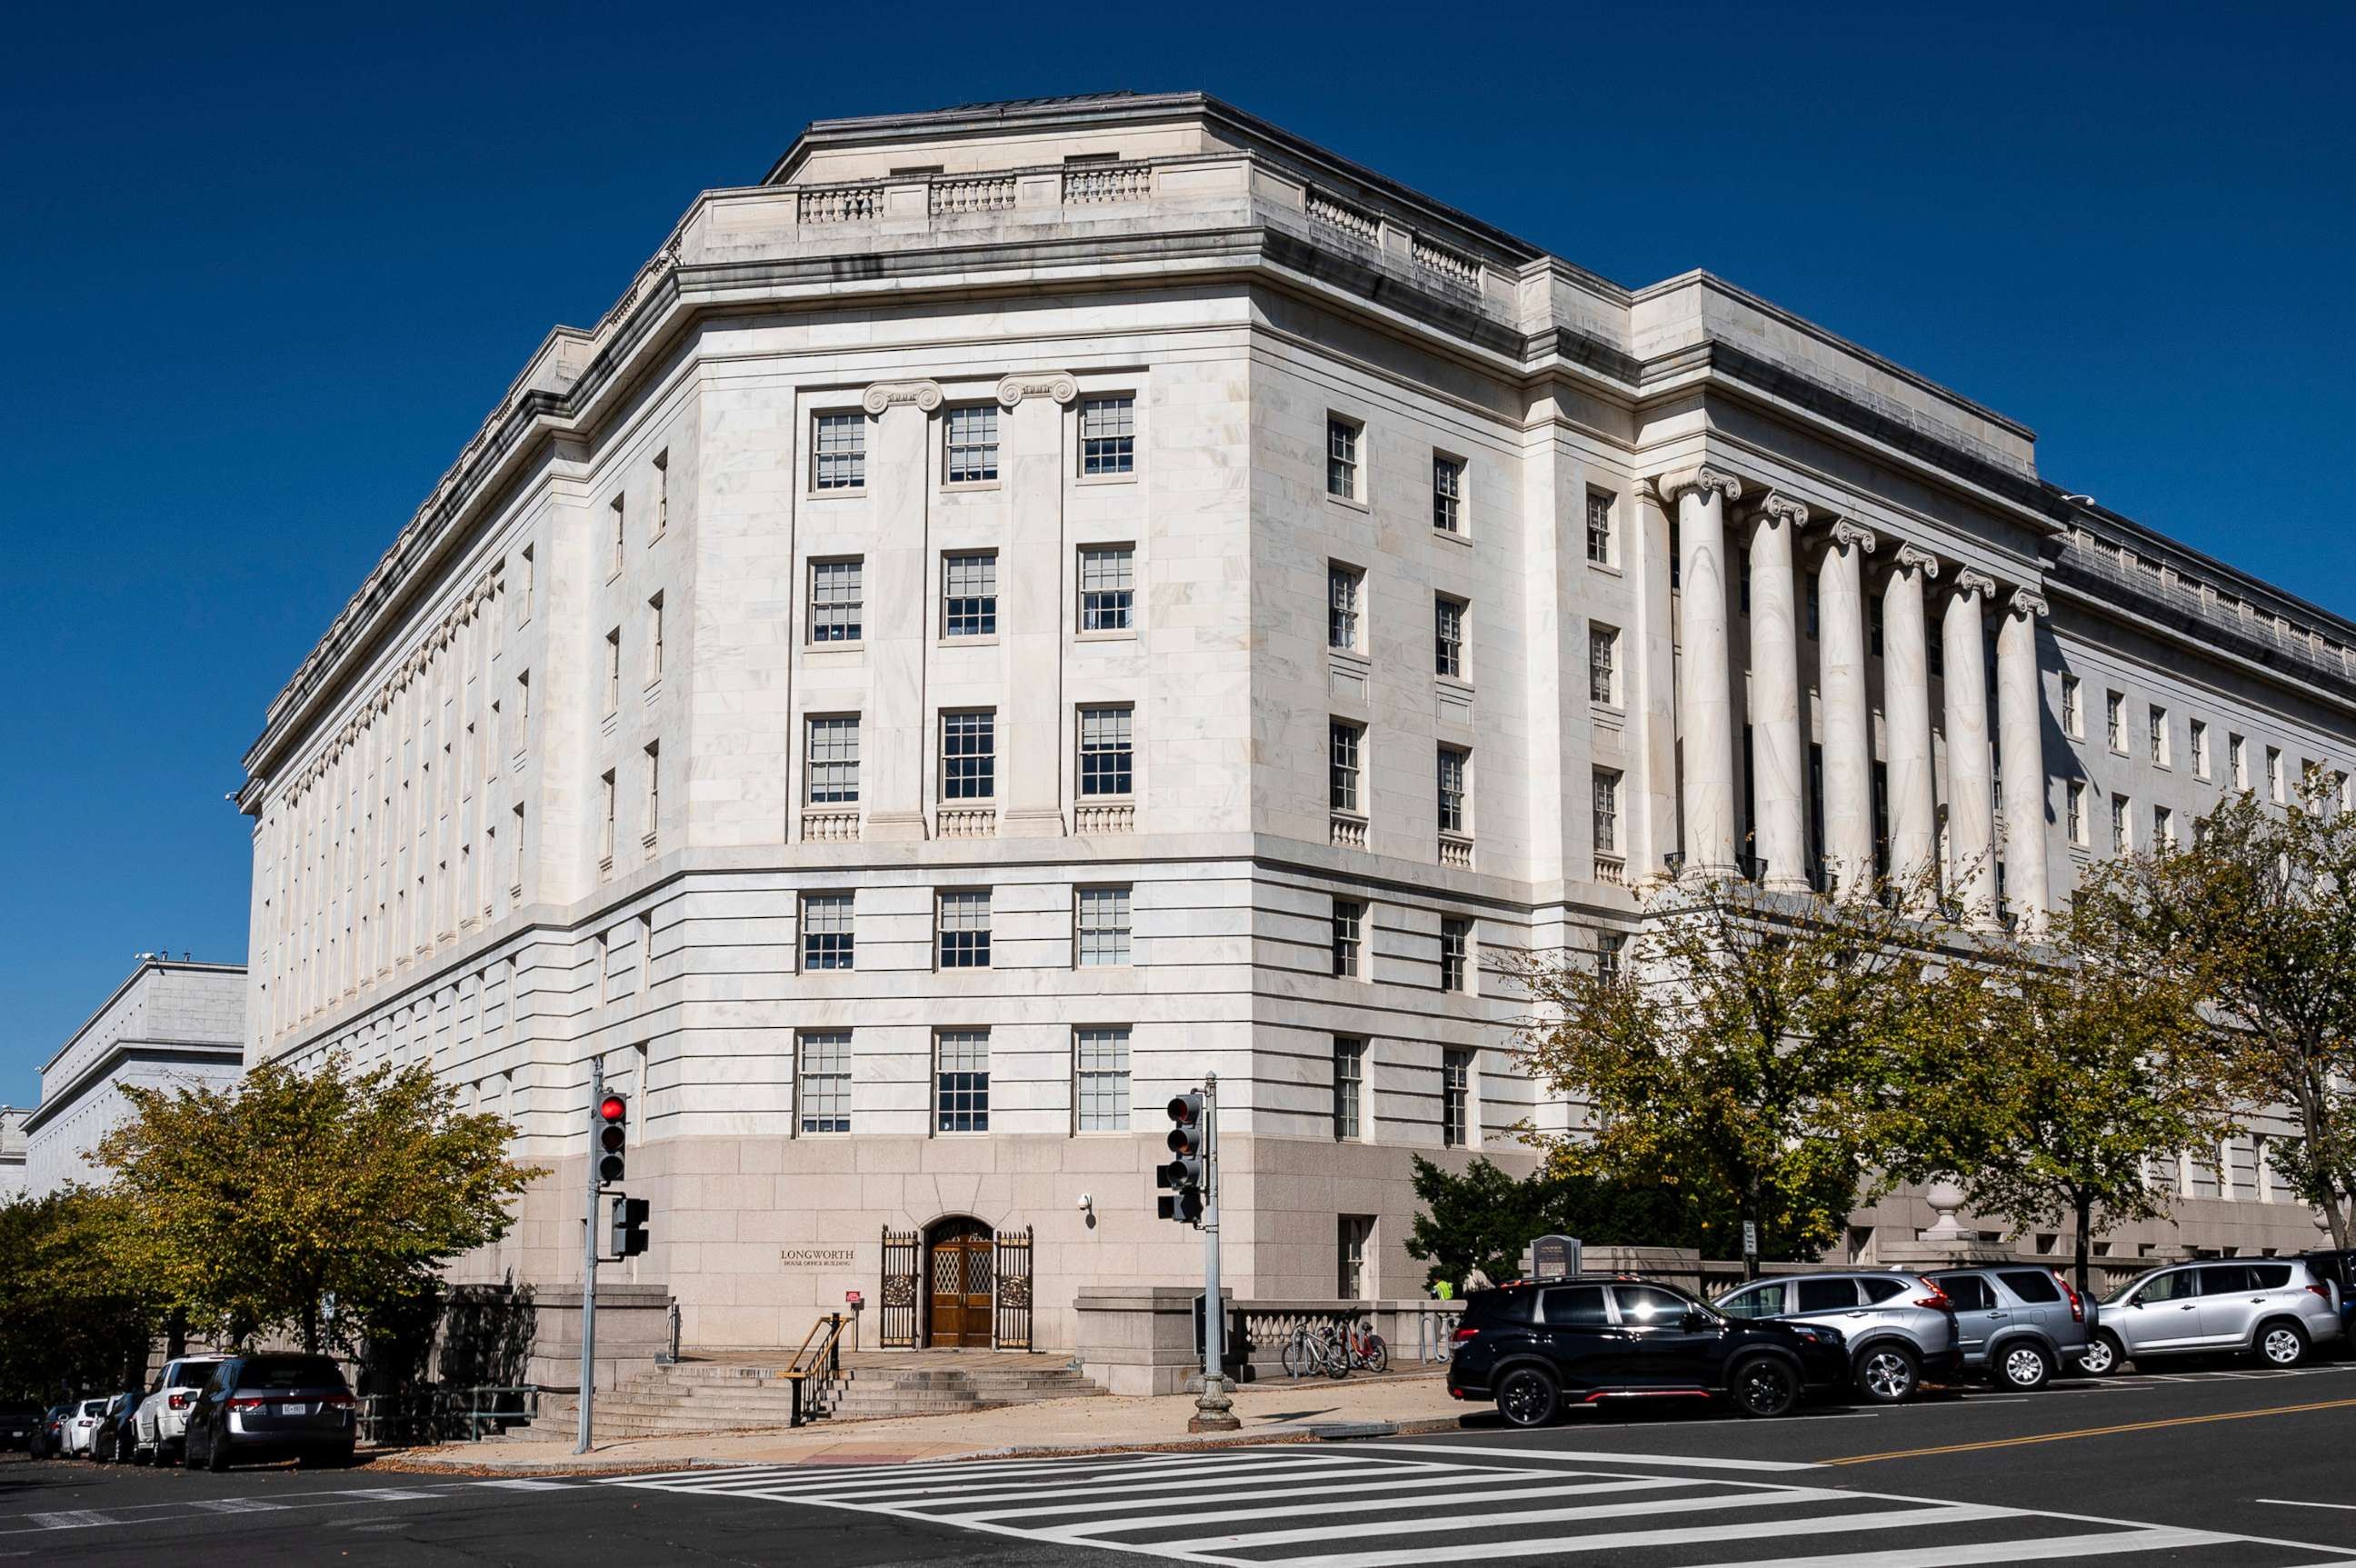 PHOTO: The Longworth House office building located near the U.S. Capitol, Oct. 5, 2020, in Washington, D.C.